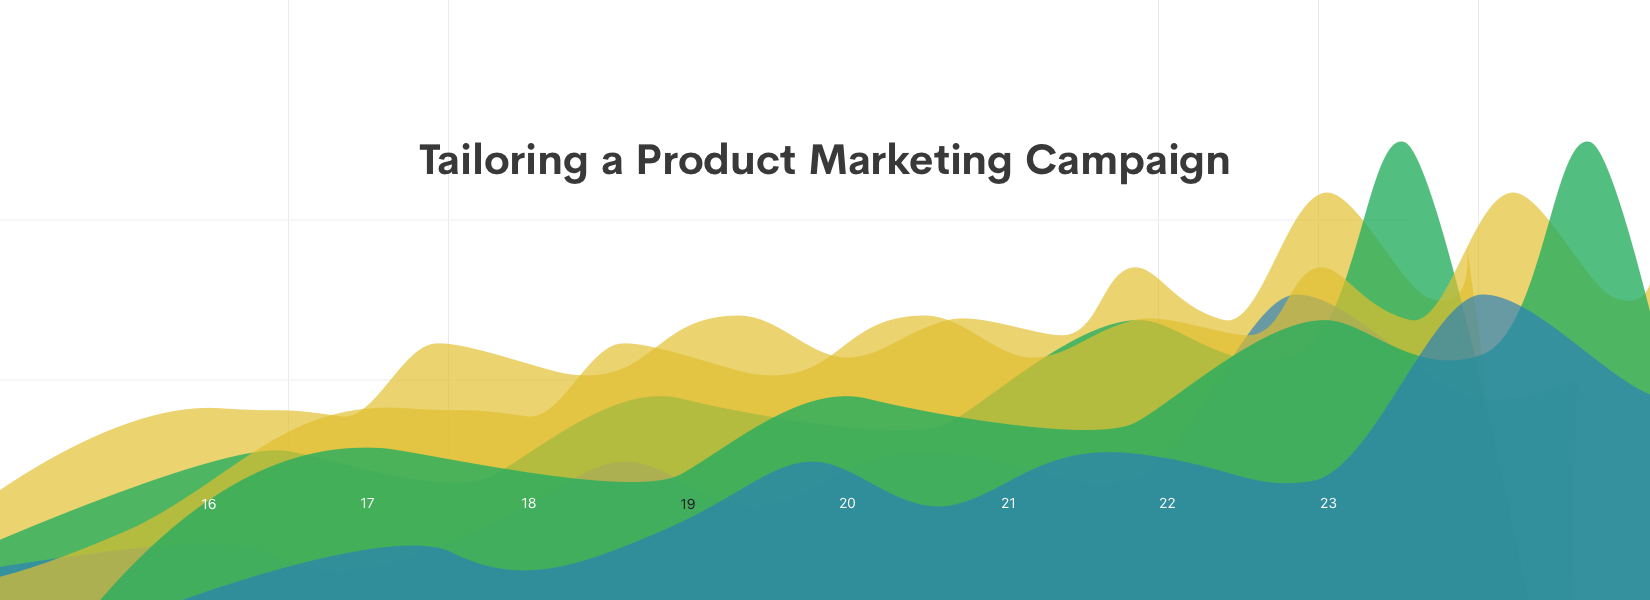 Tailoring a Product Marketing Campaign